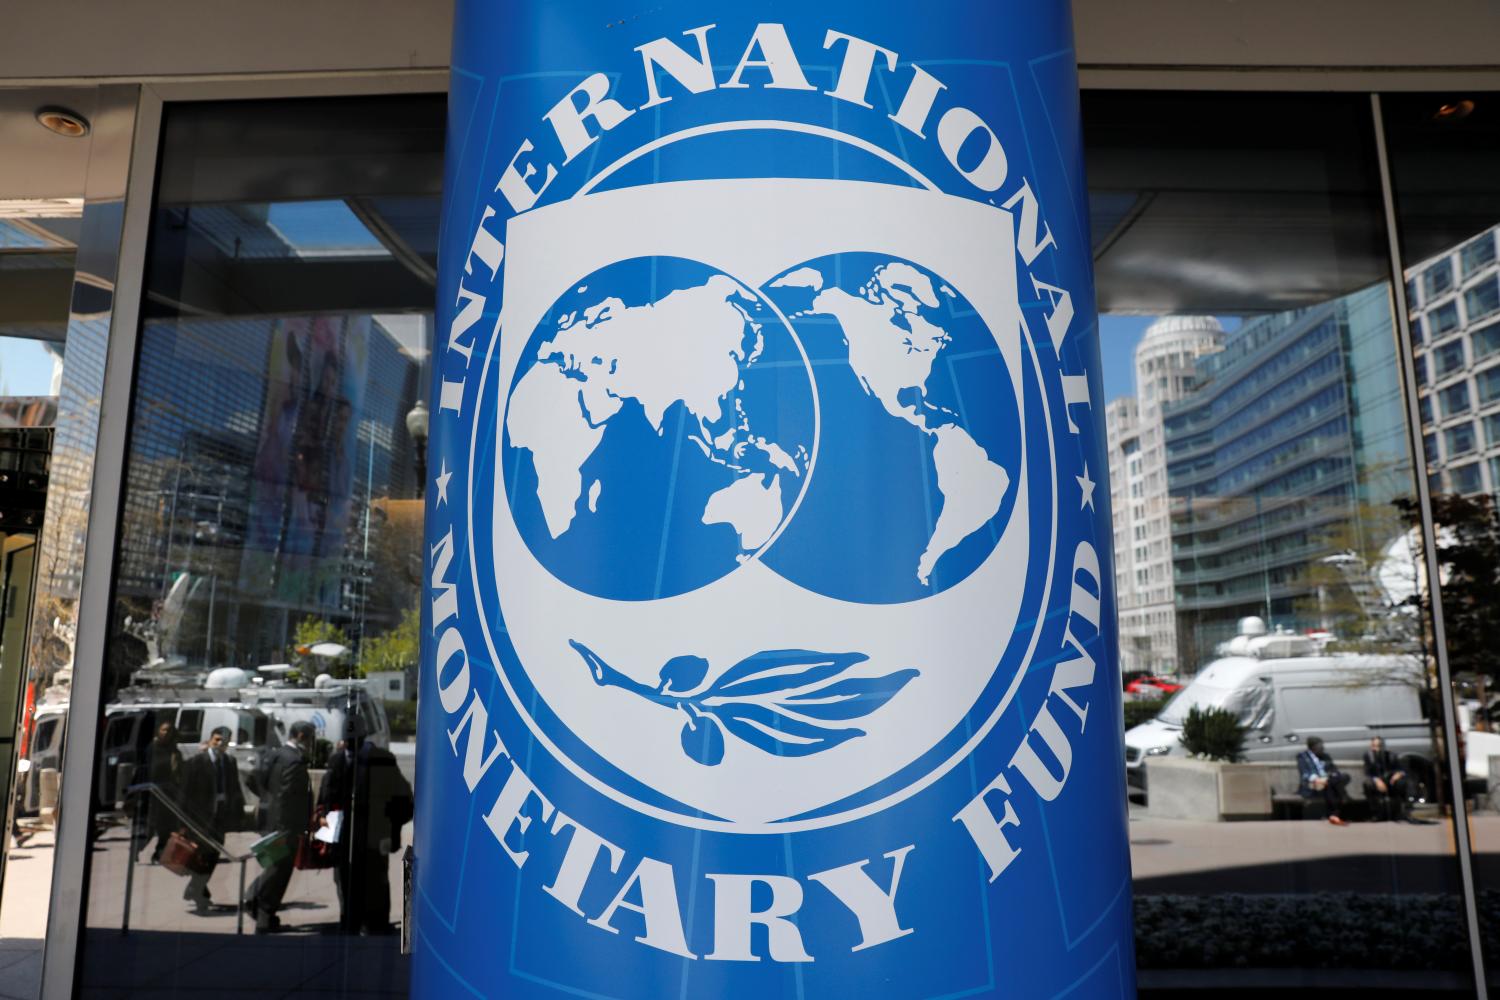 International Monetary Fund logo is seen outside the headquarters building during the IMF/World Bank spring meeting in Washington, U.S., April 20, 2018. REUTERS/Yuri Gripas - RC13CB8CD000